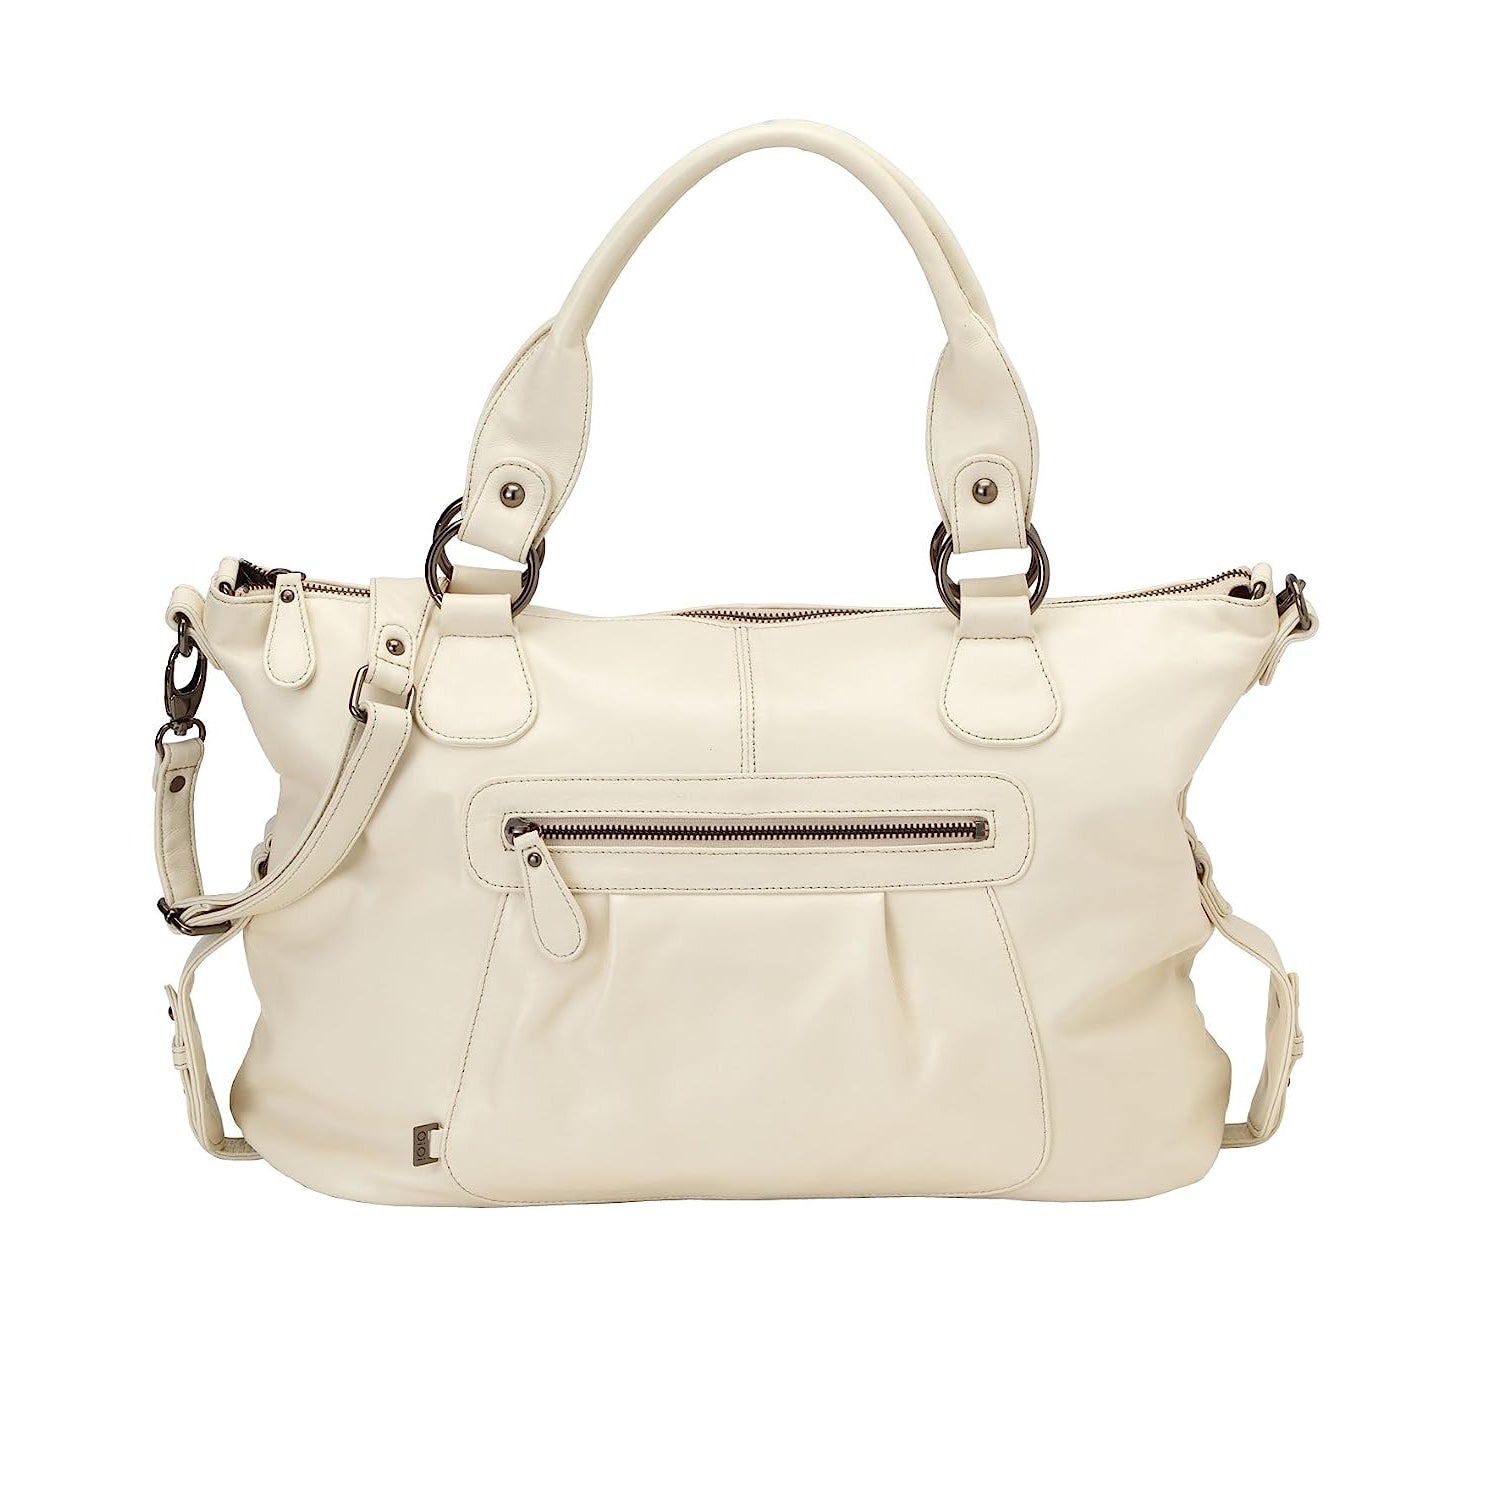 oioi Ivory Leather Slouch Tote Diaper Bag